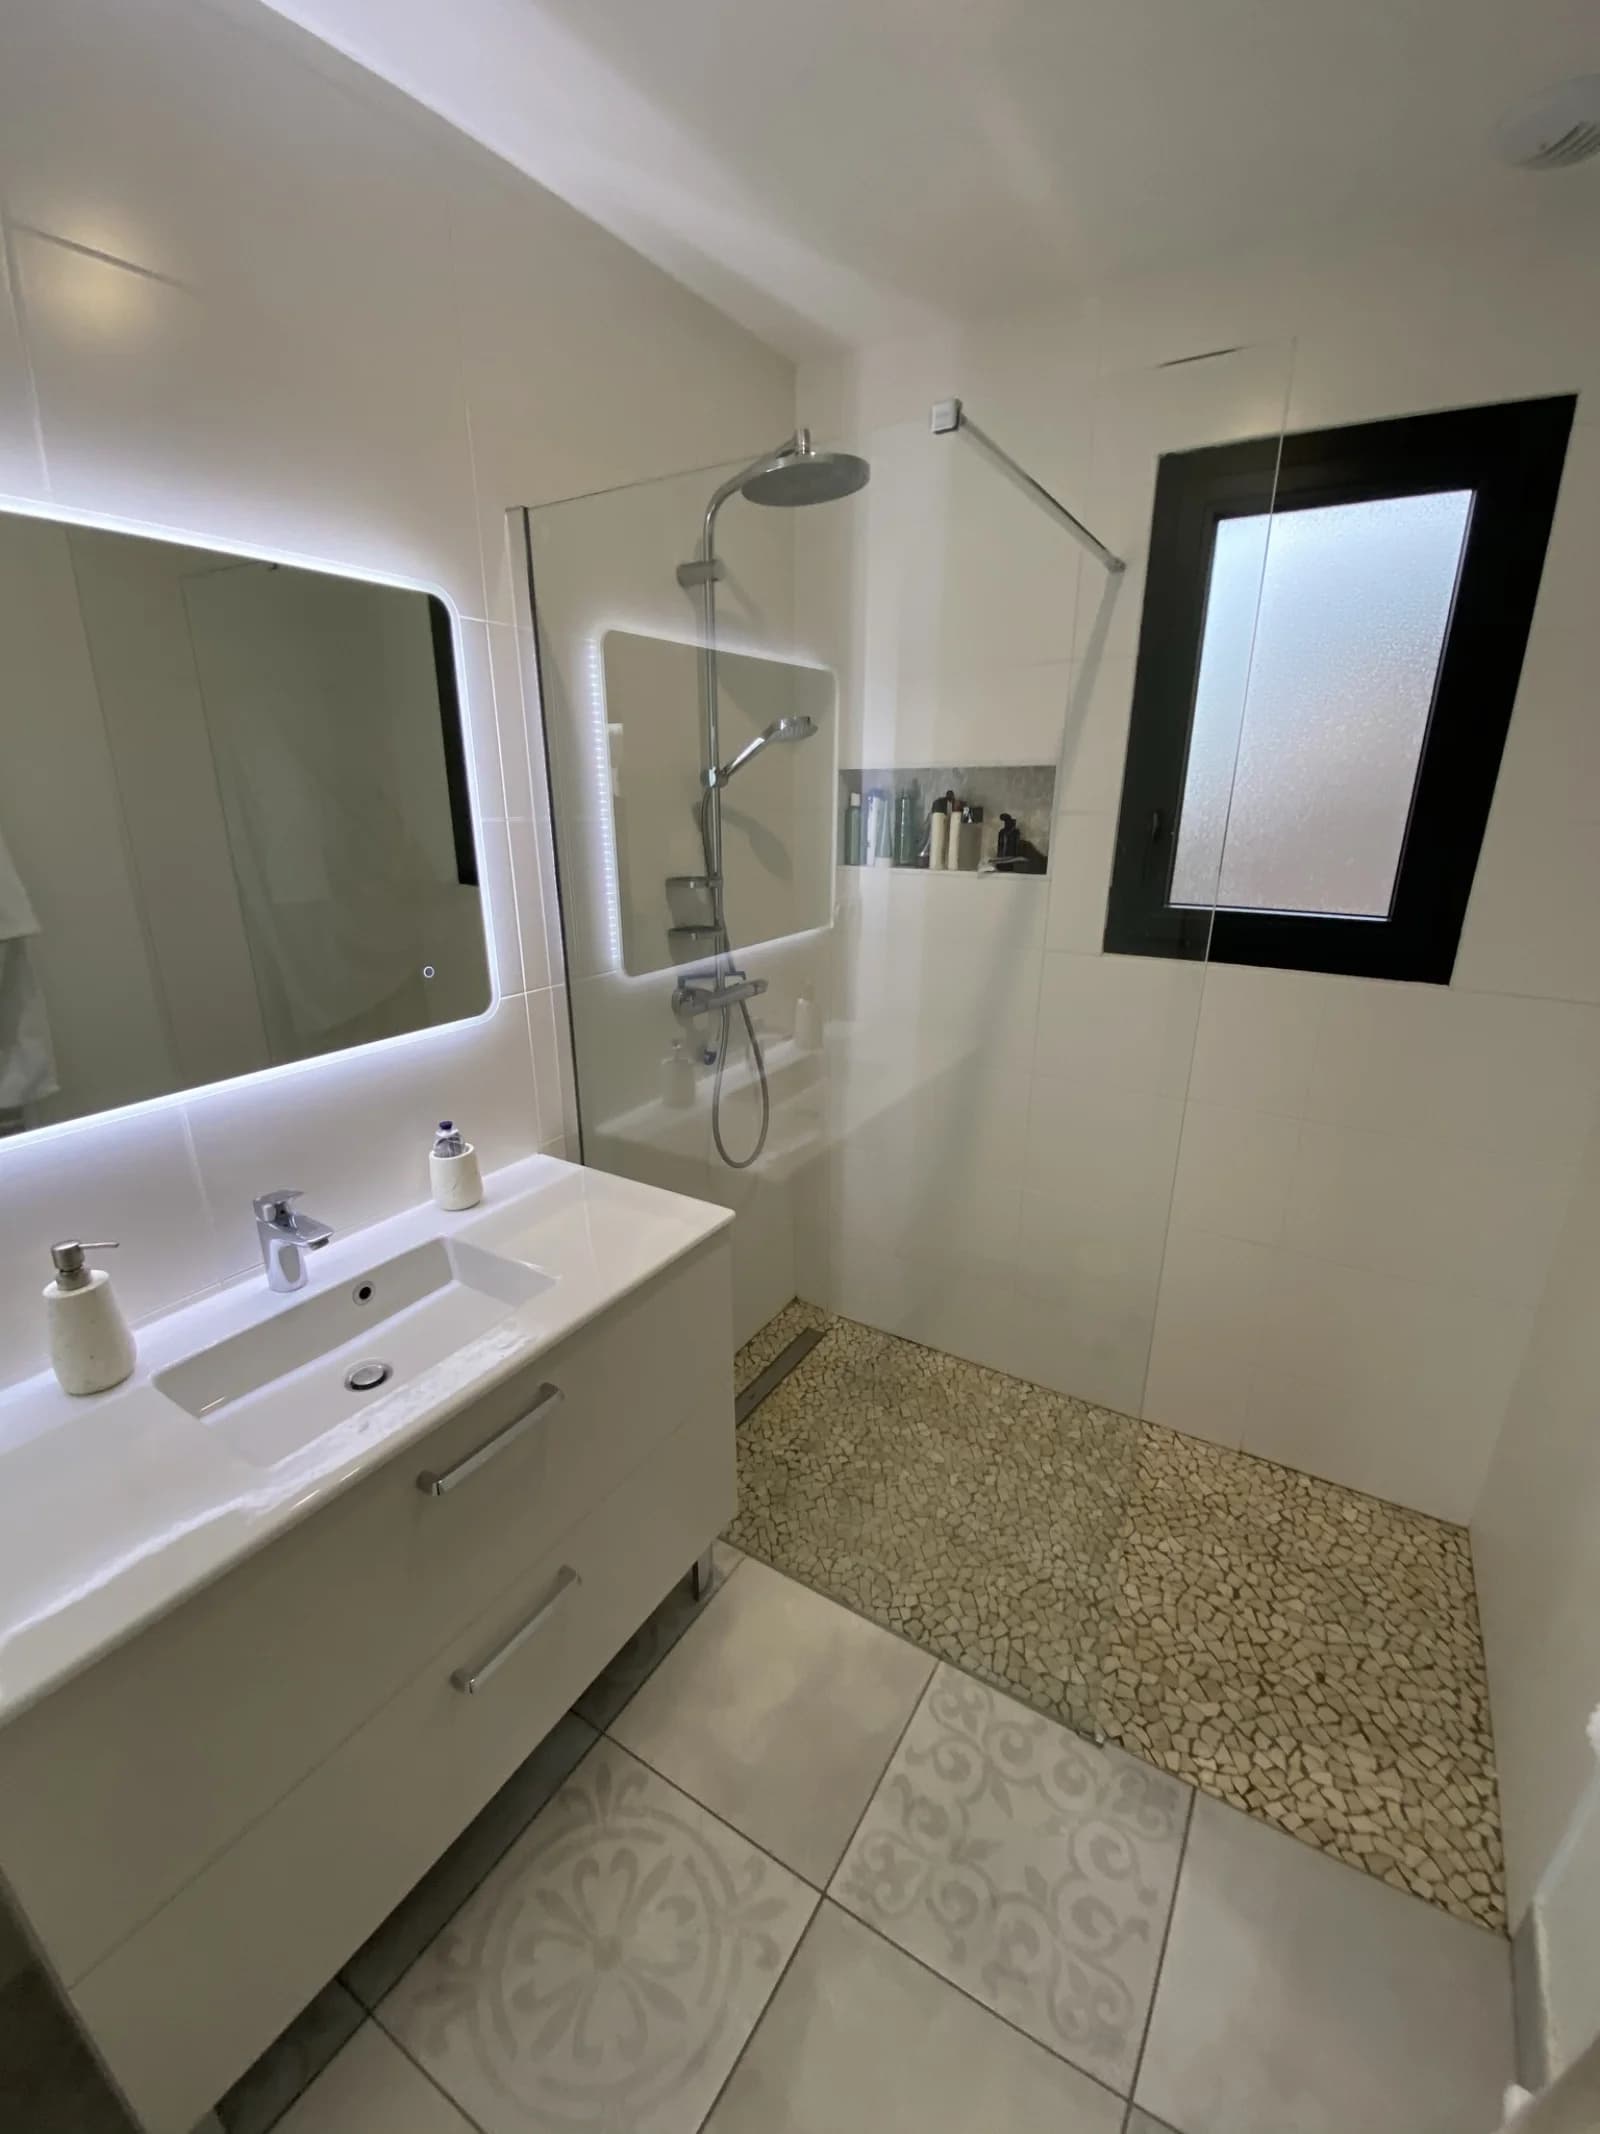 Bathroom in Contemporary house in the heart of Beaujolais - 1